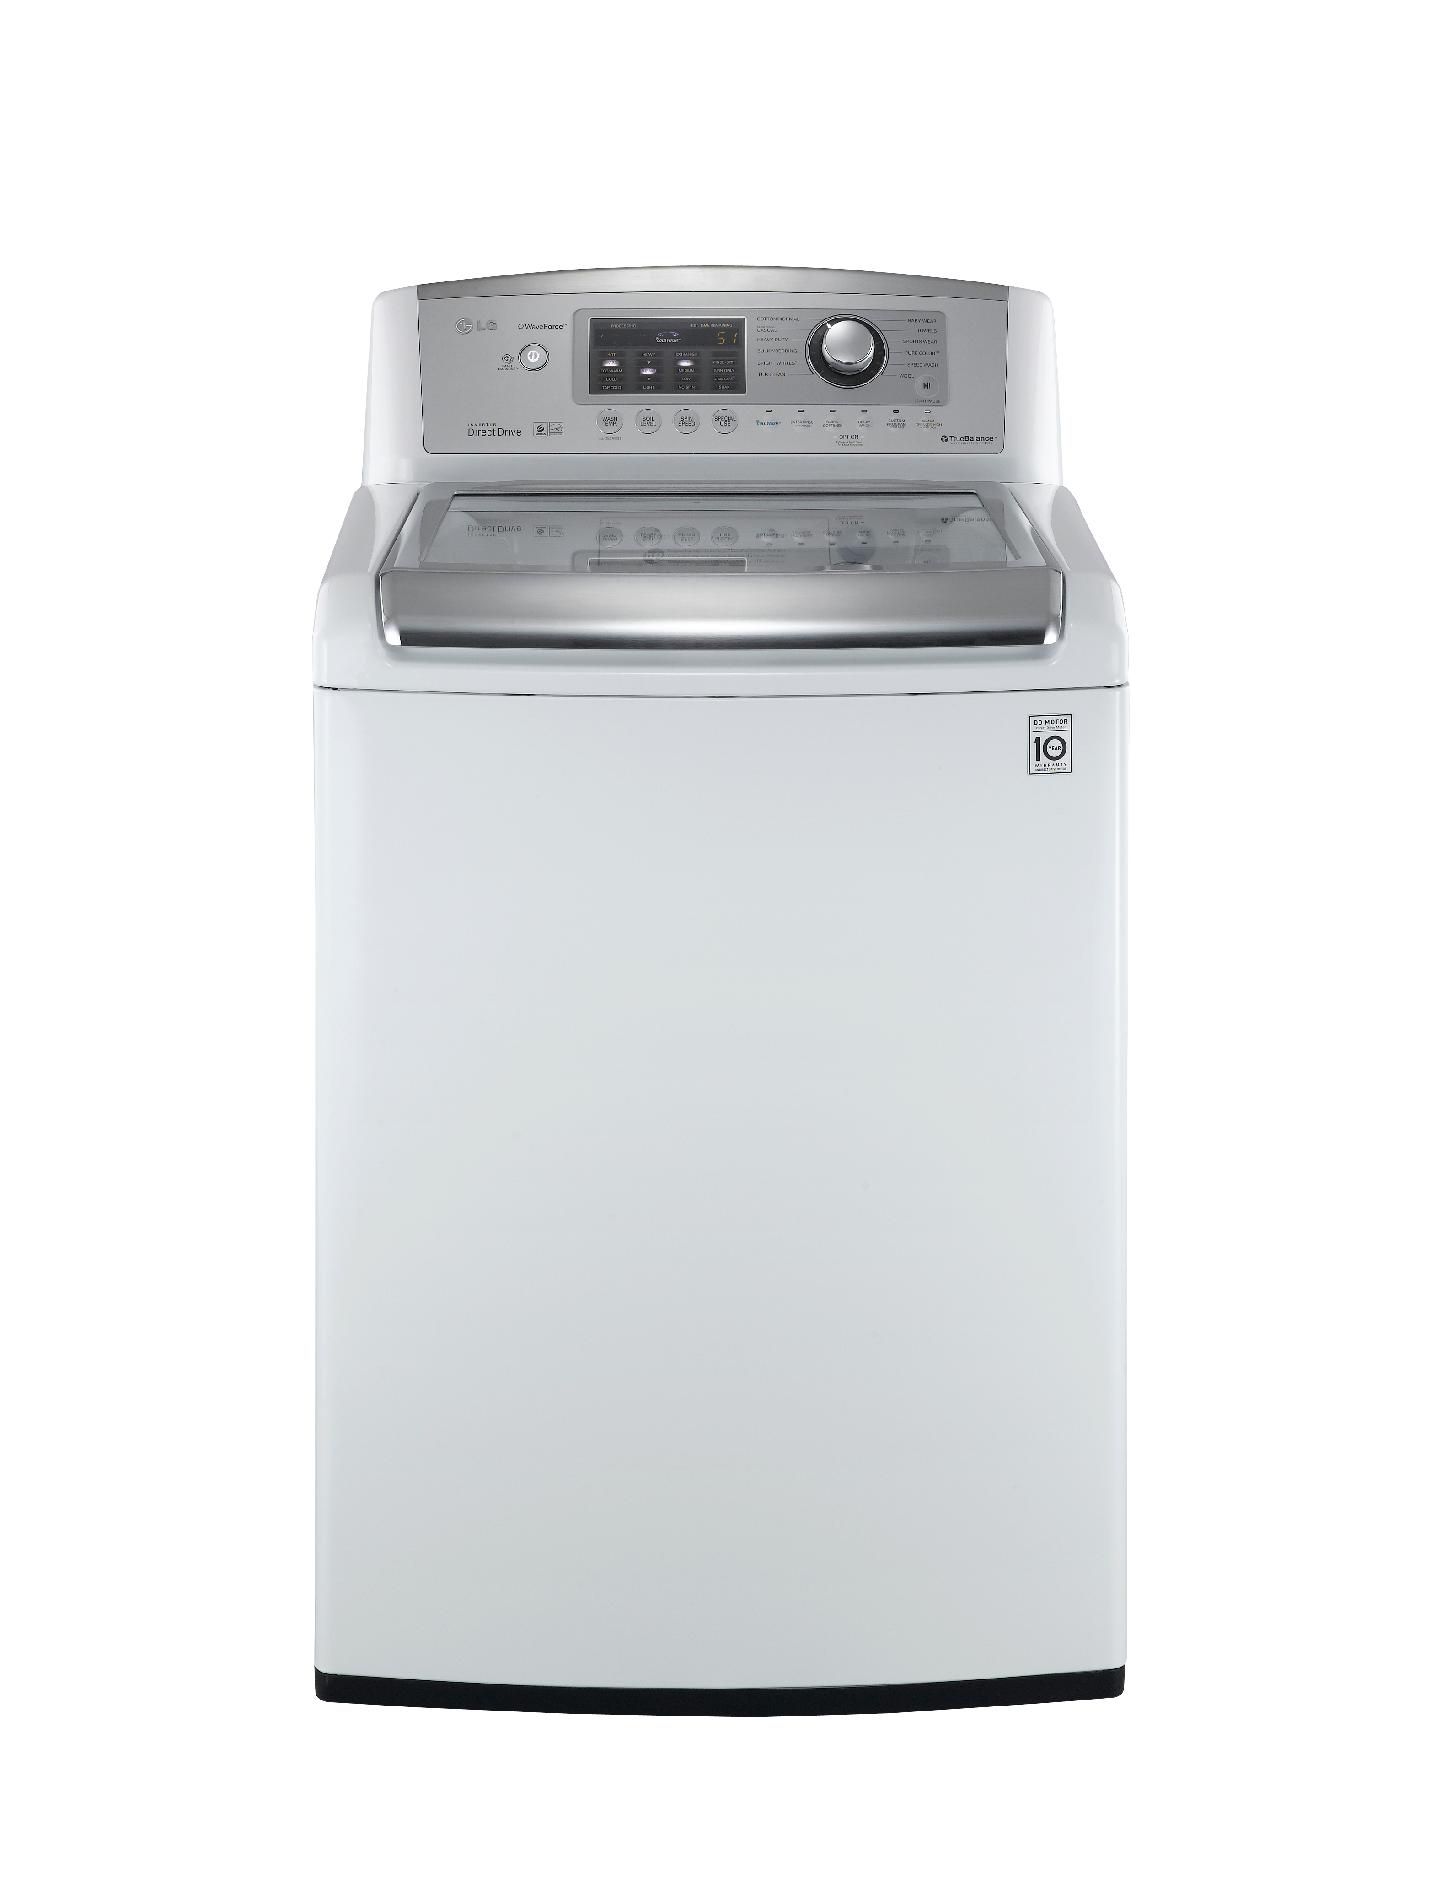 LG 4.7 cu. ft. High-Efficiency Top-Load Washer - White